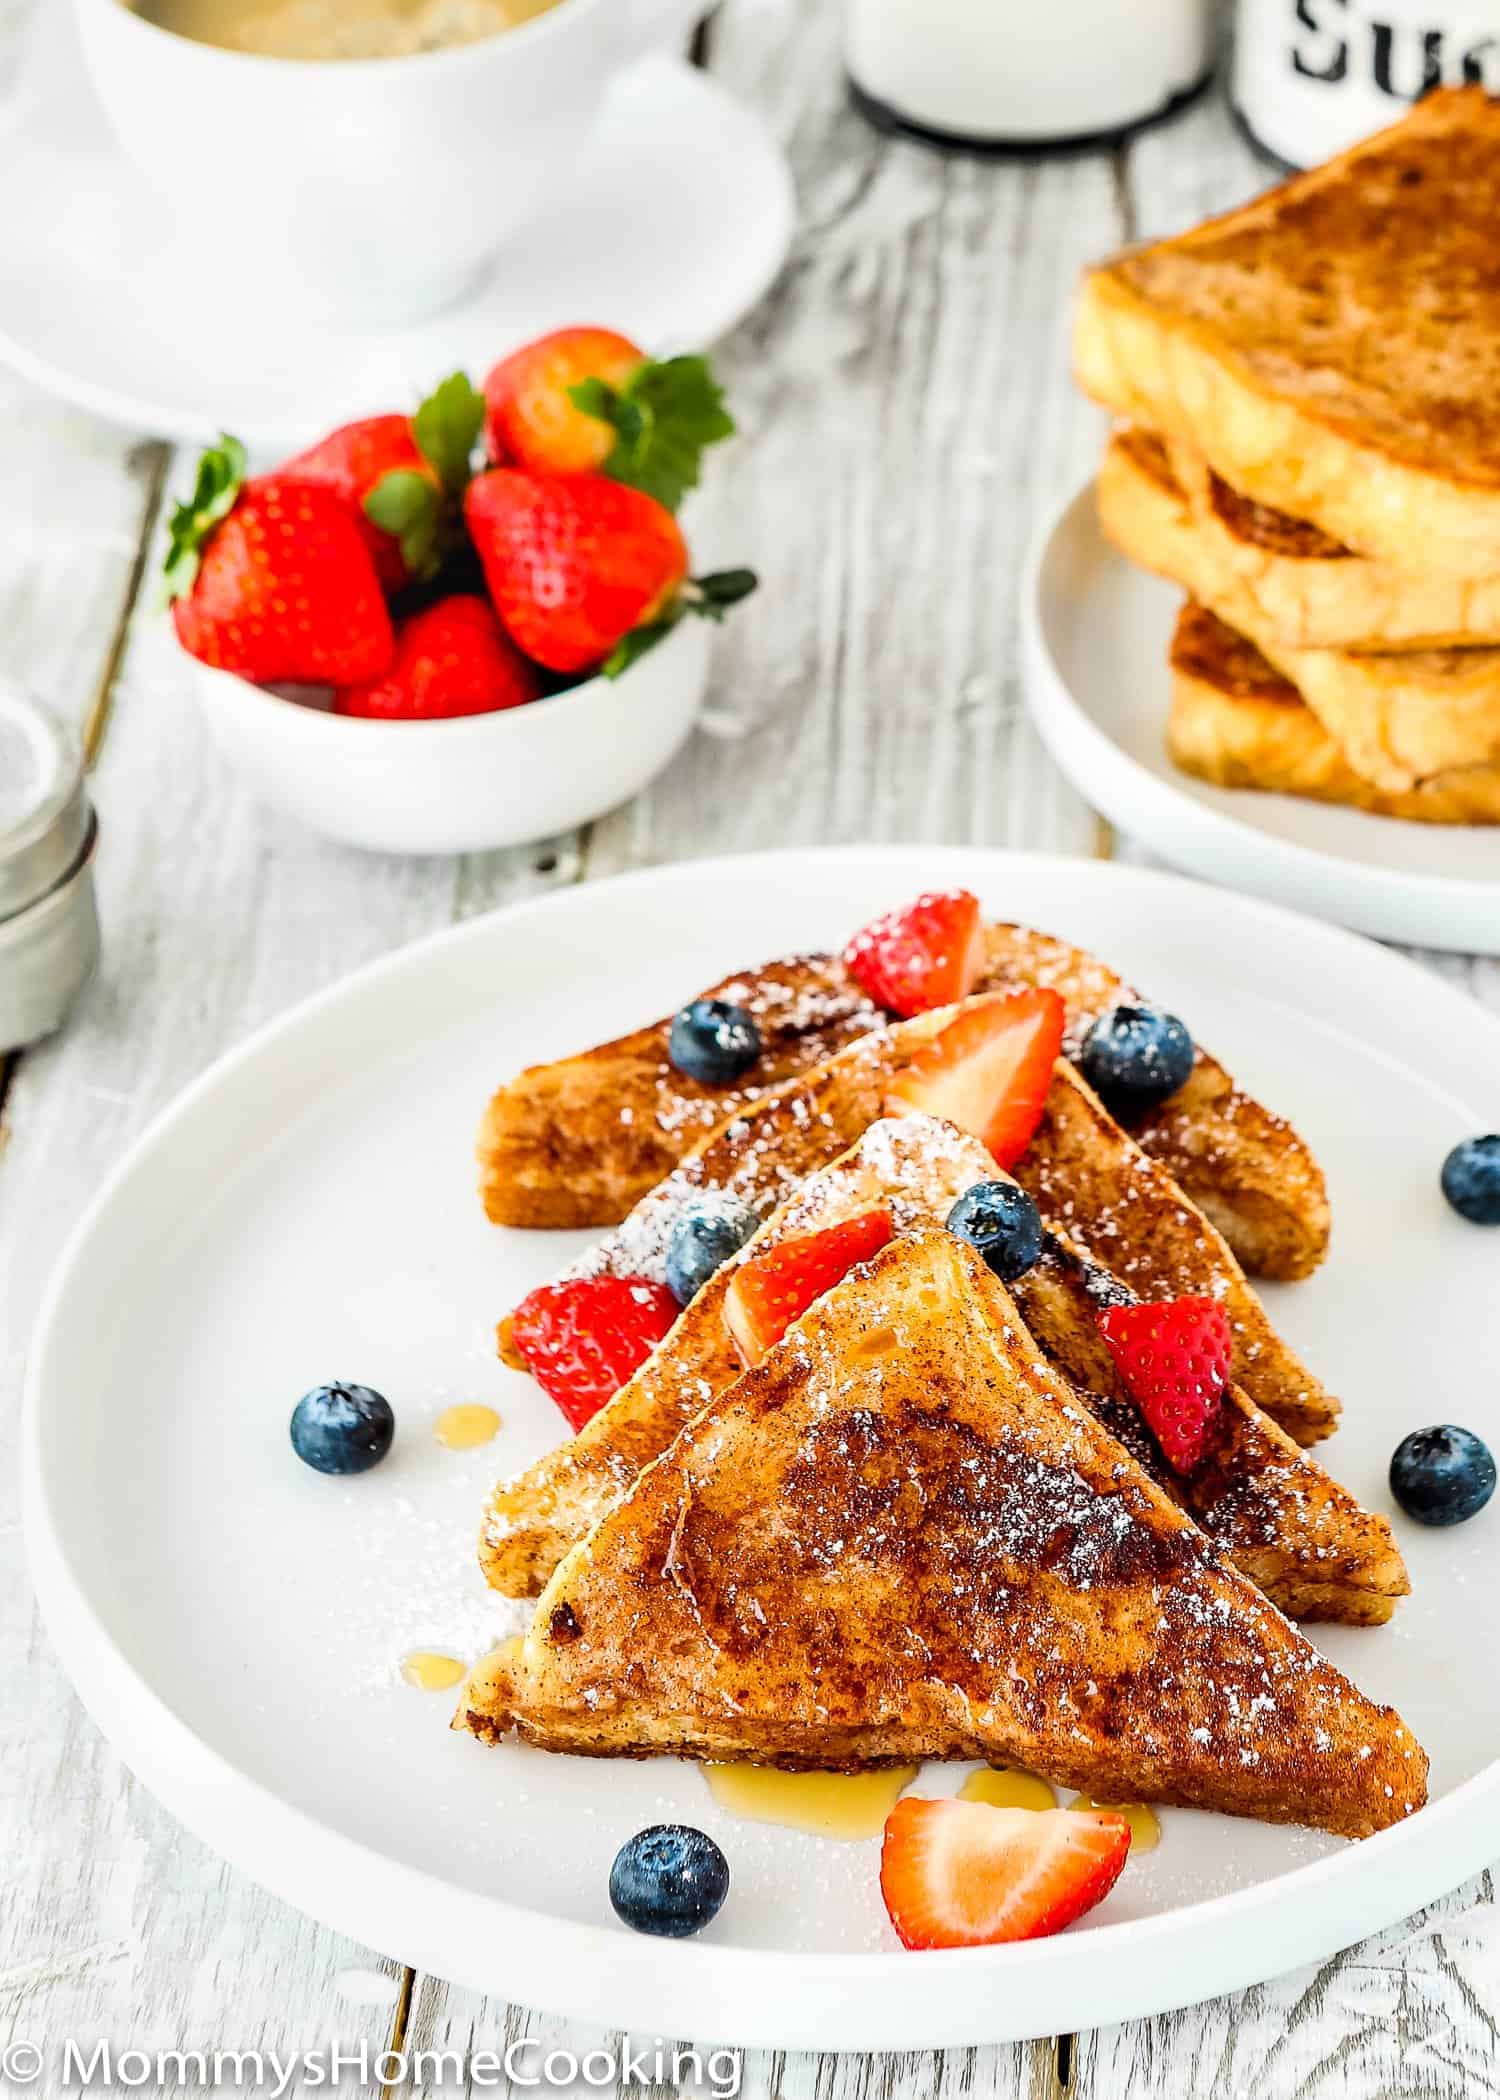 A plate of French toast that was made without eggs with fresh fruit on top.